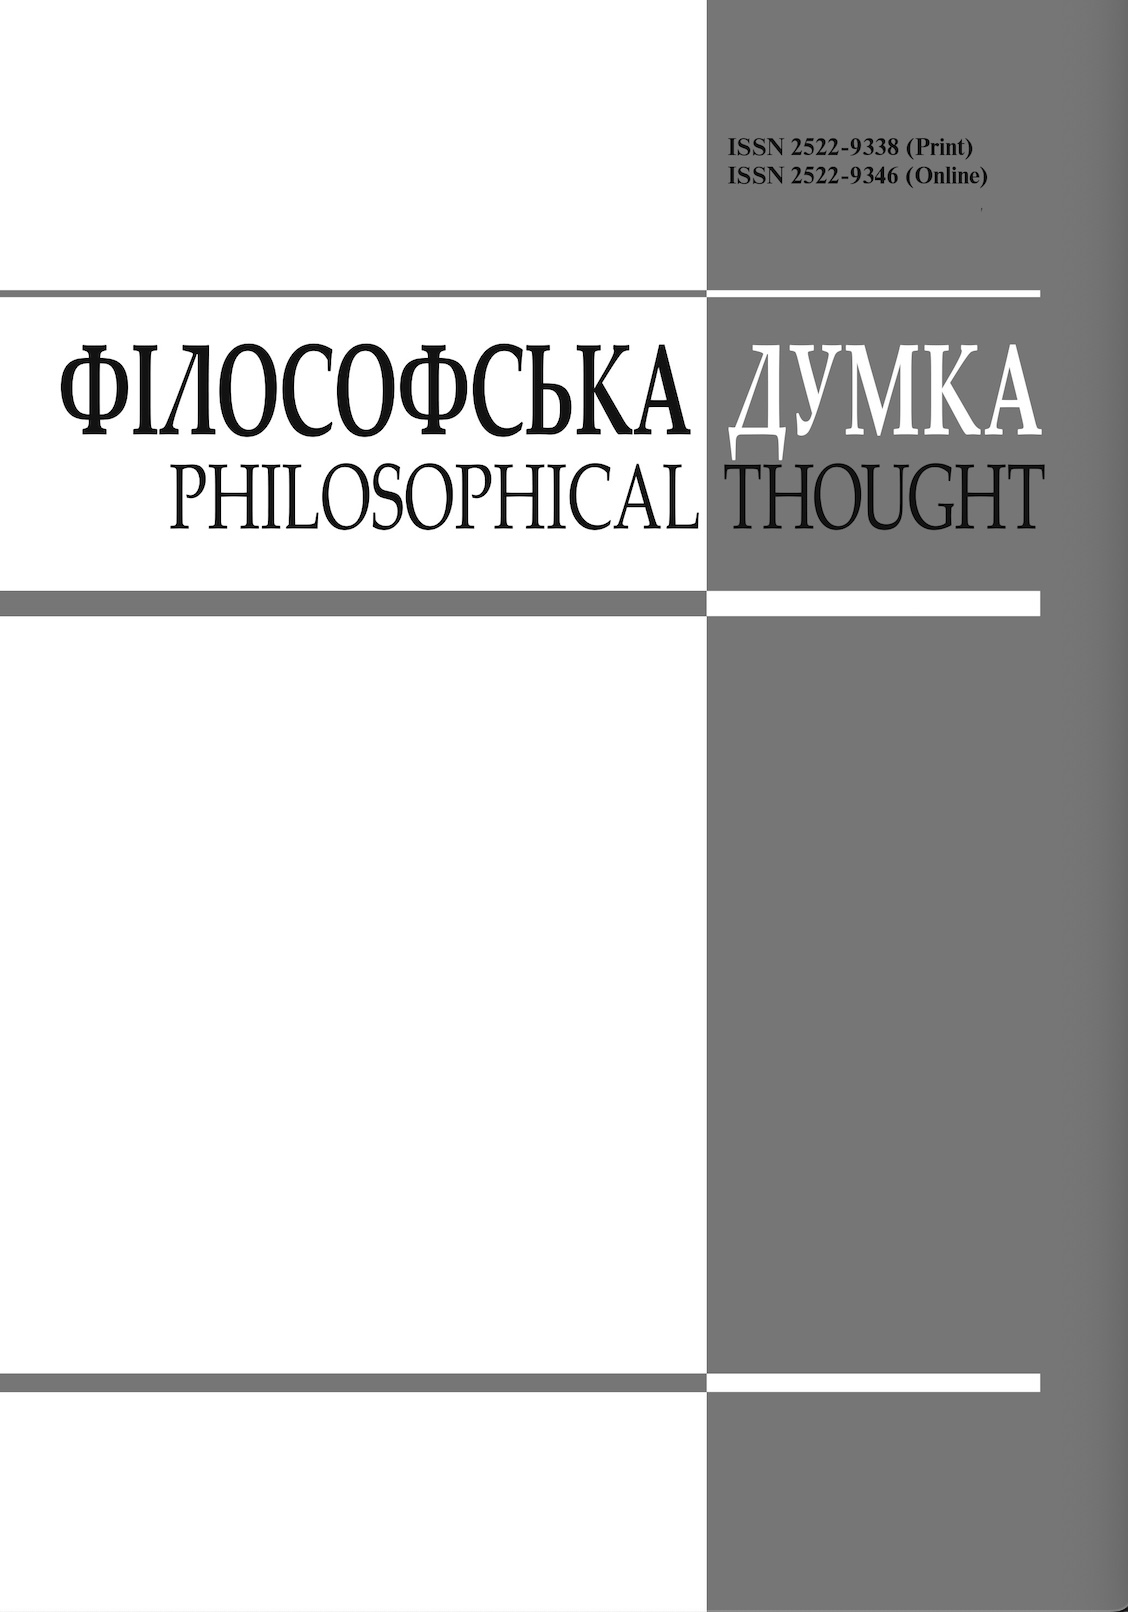 					View No. 6 (2013): PHILOSOPHICAL THOUGHT
				